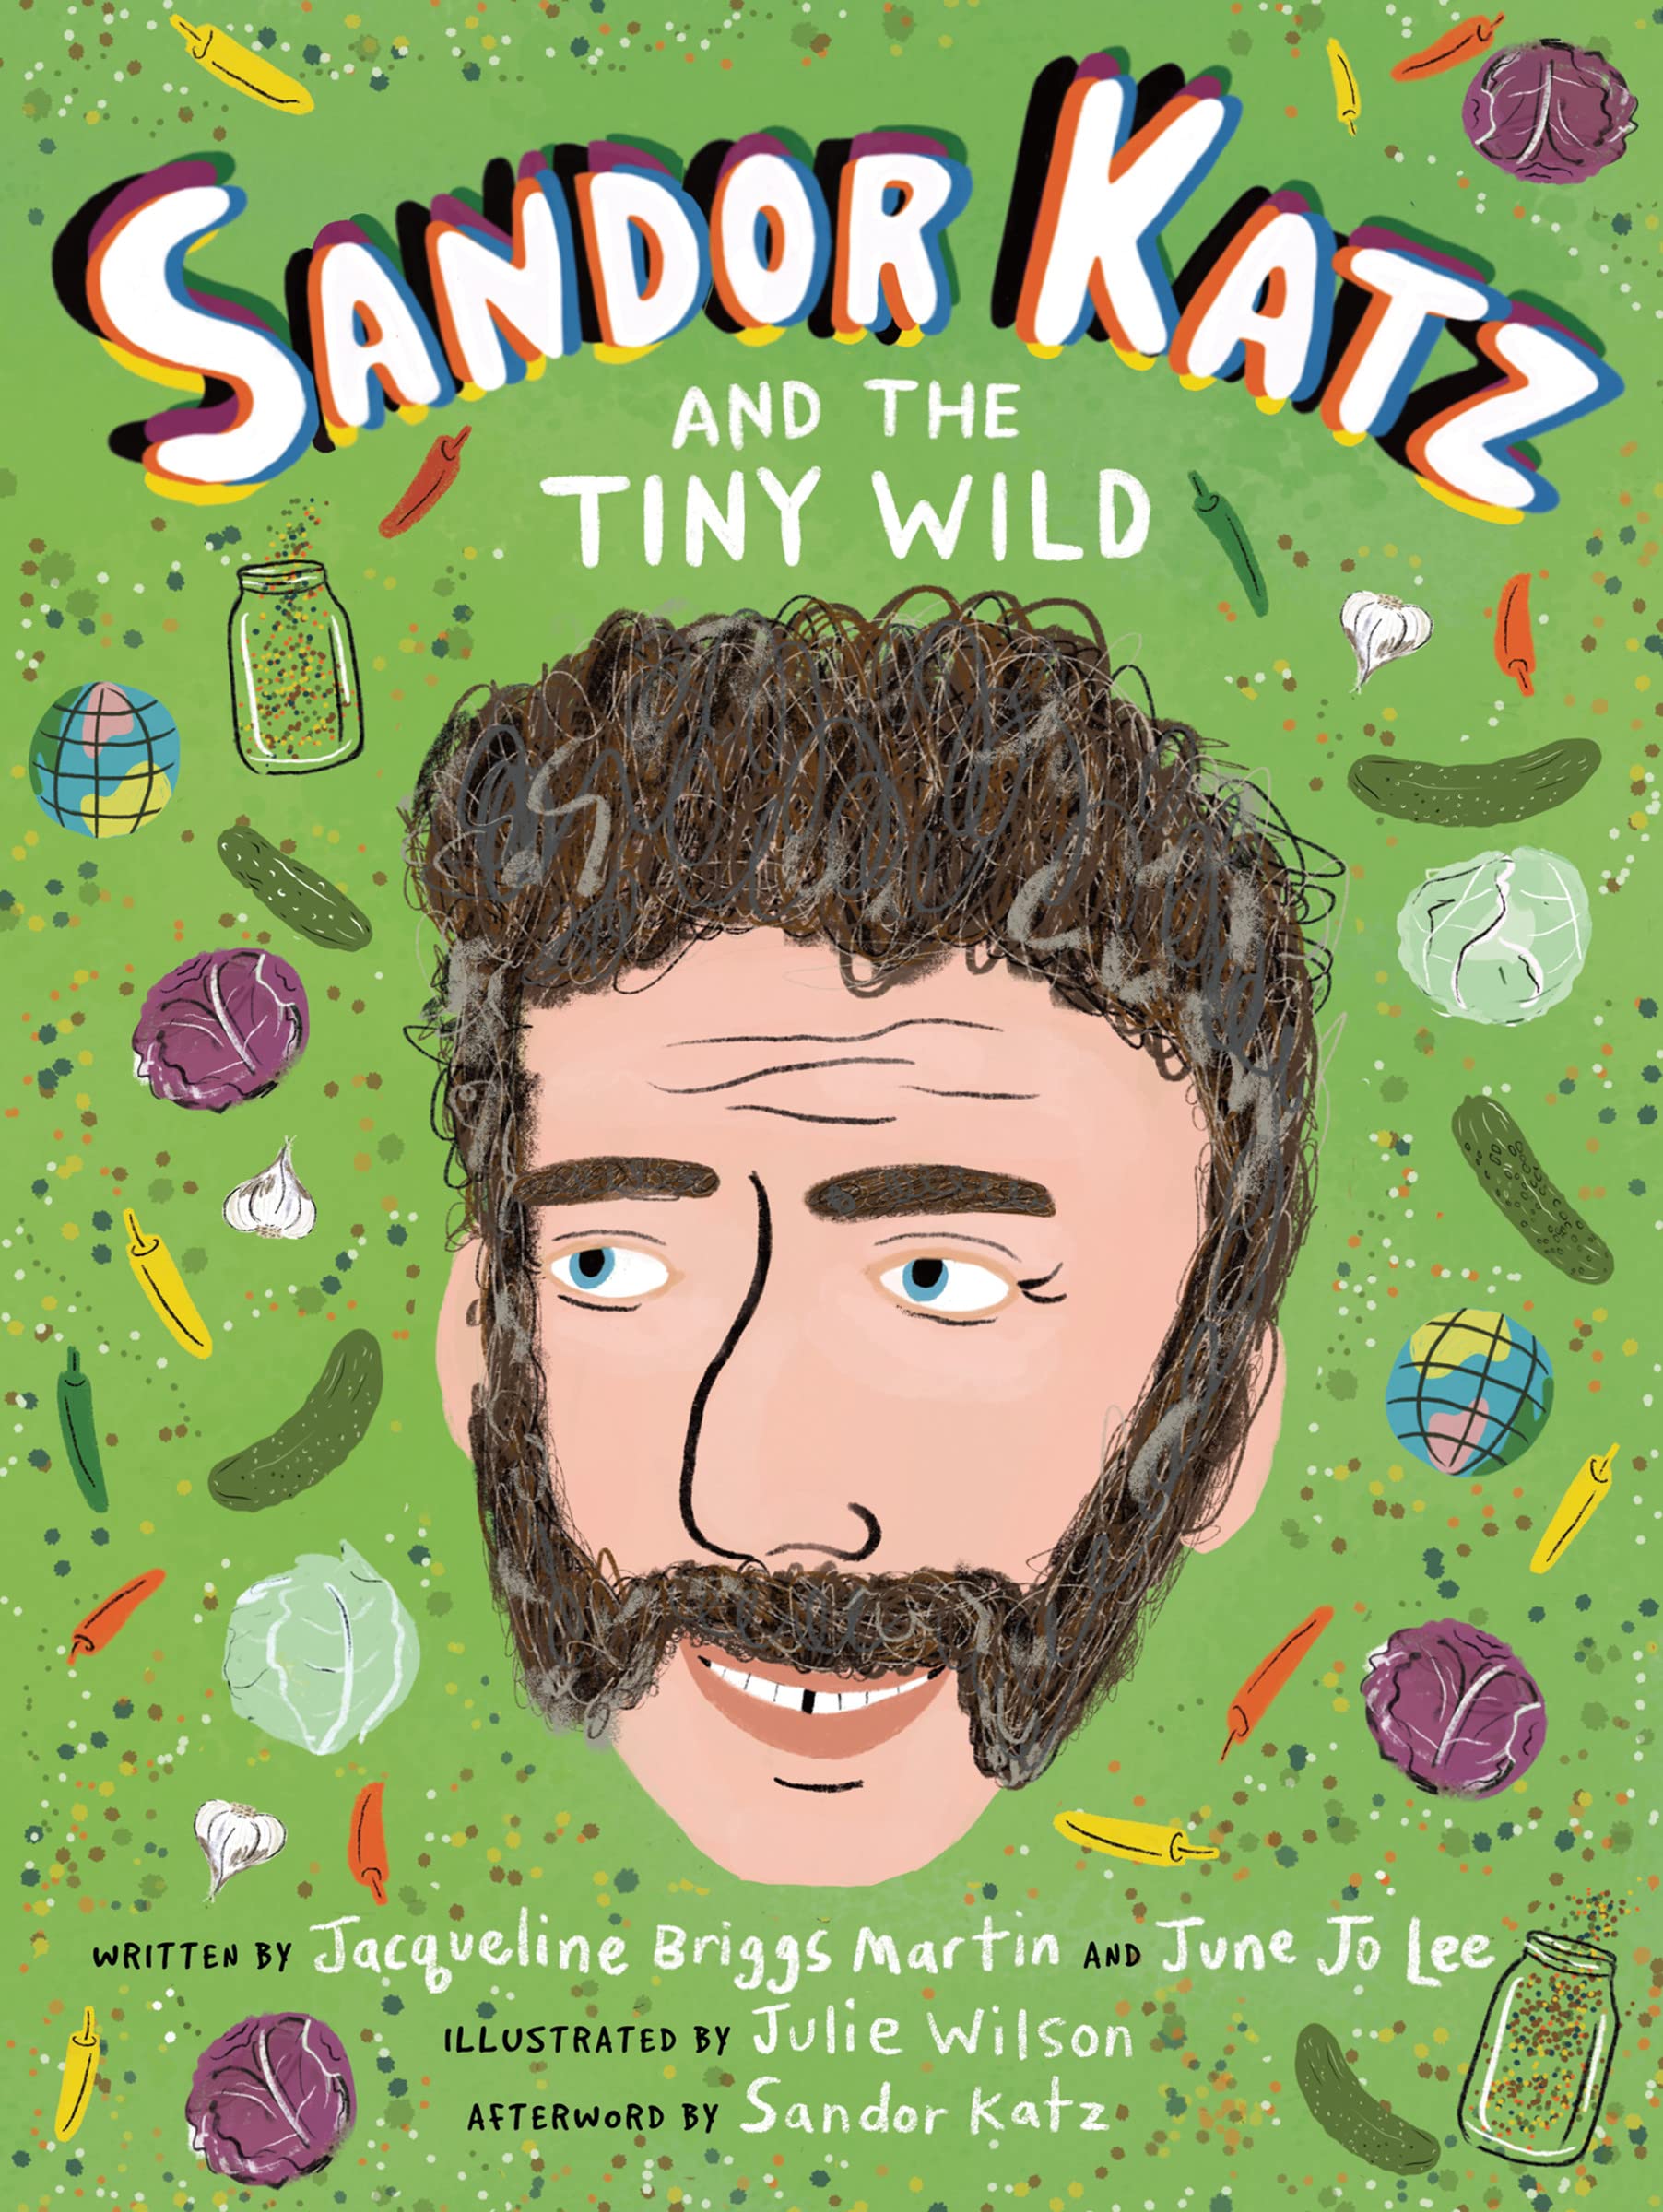 Cover of the book Sandor Katz and the Tiny Wild. Features an illustration fo Sandor Katz' face on a green background, surrounded by cartoons of the ingredients for sauerkraut.